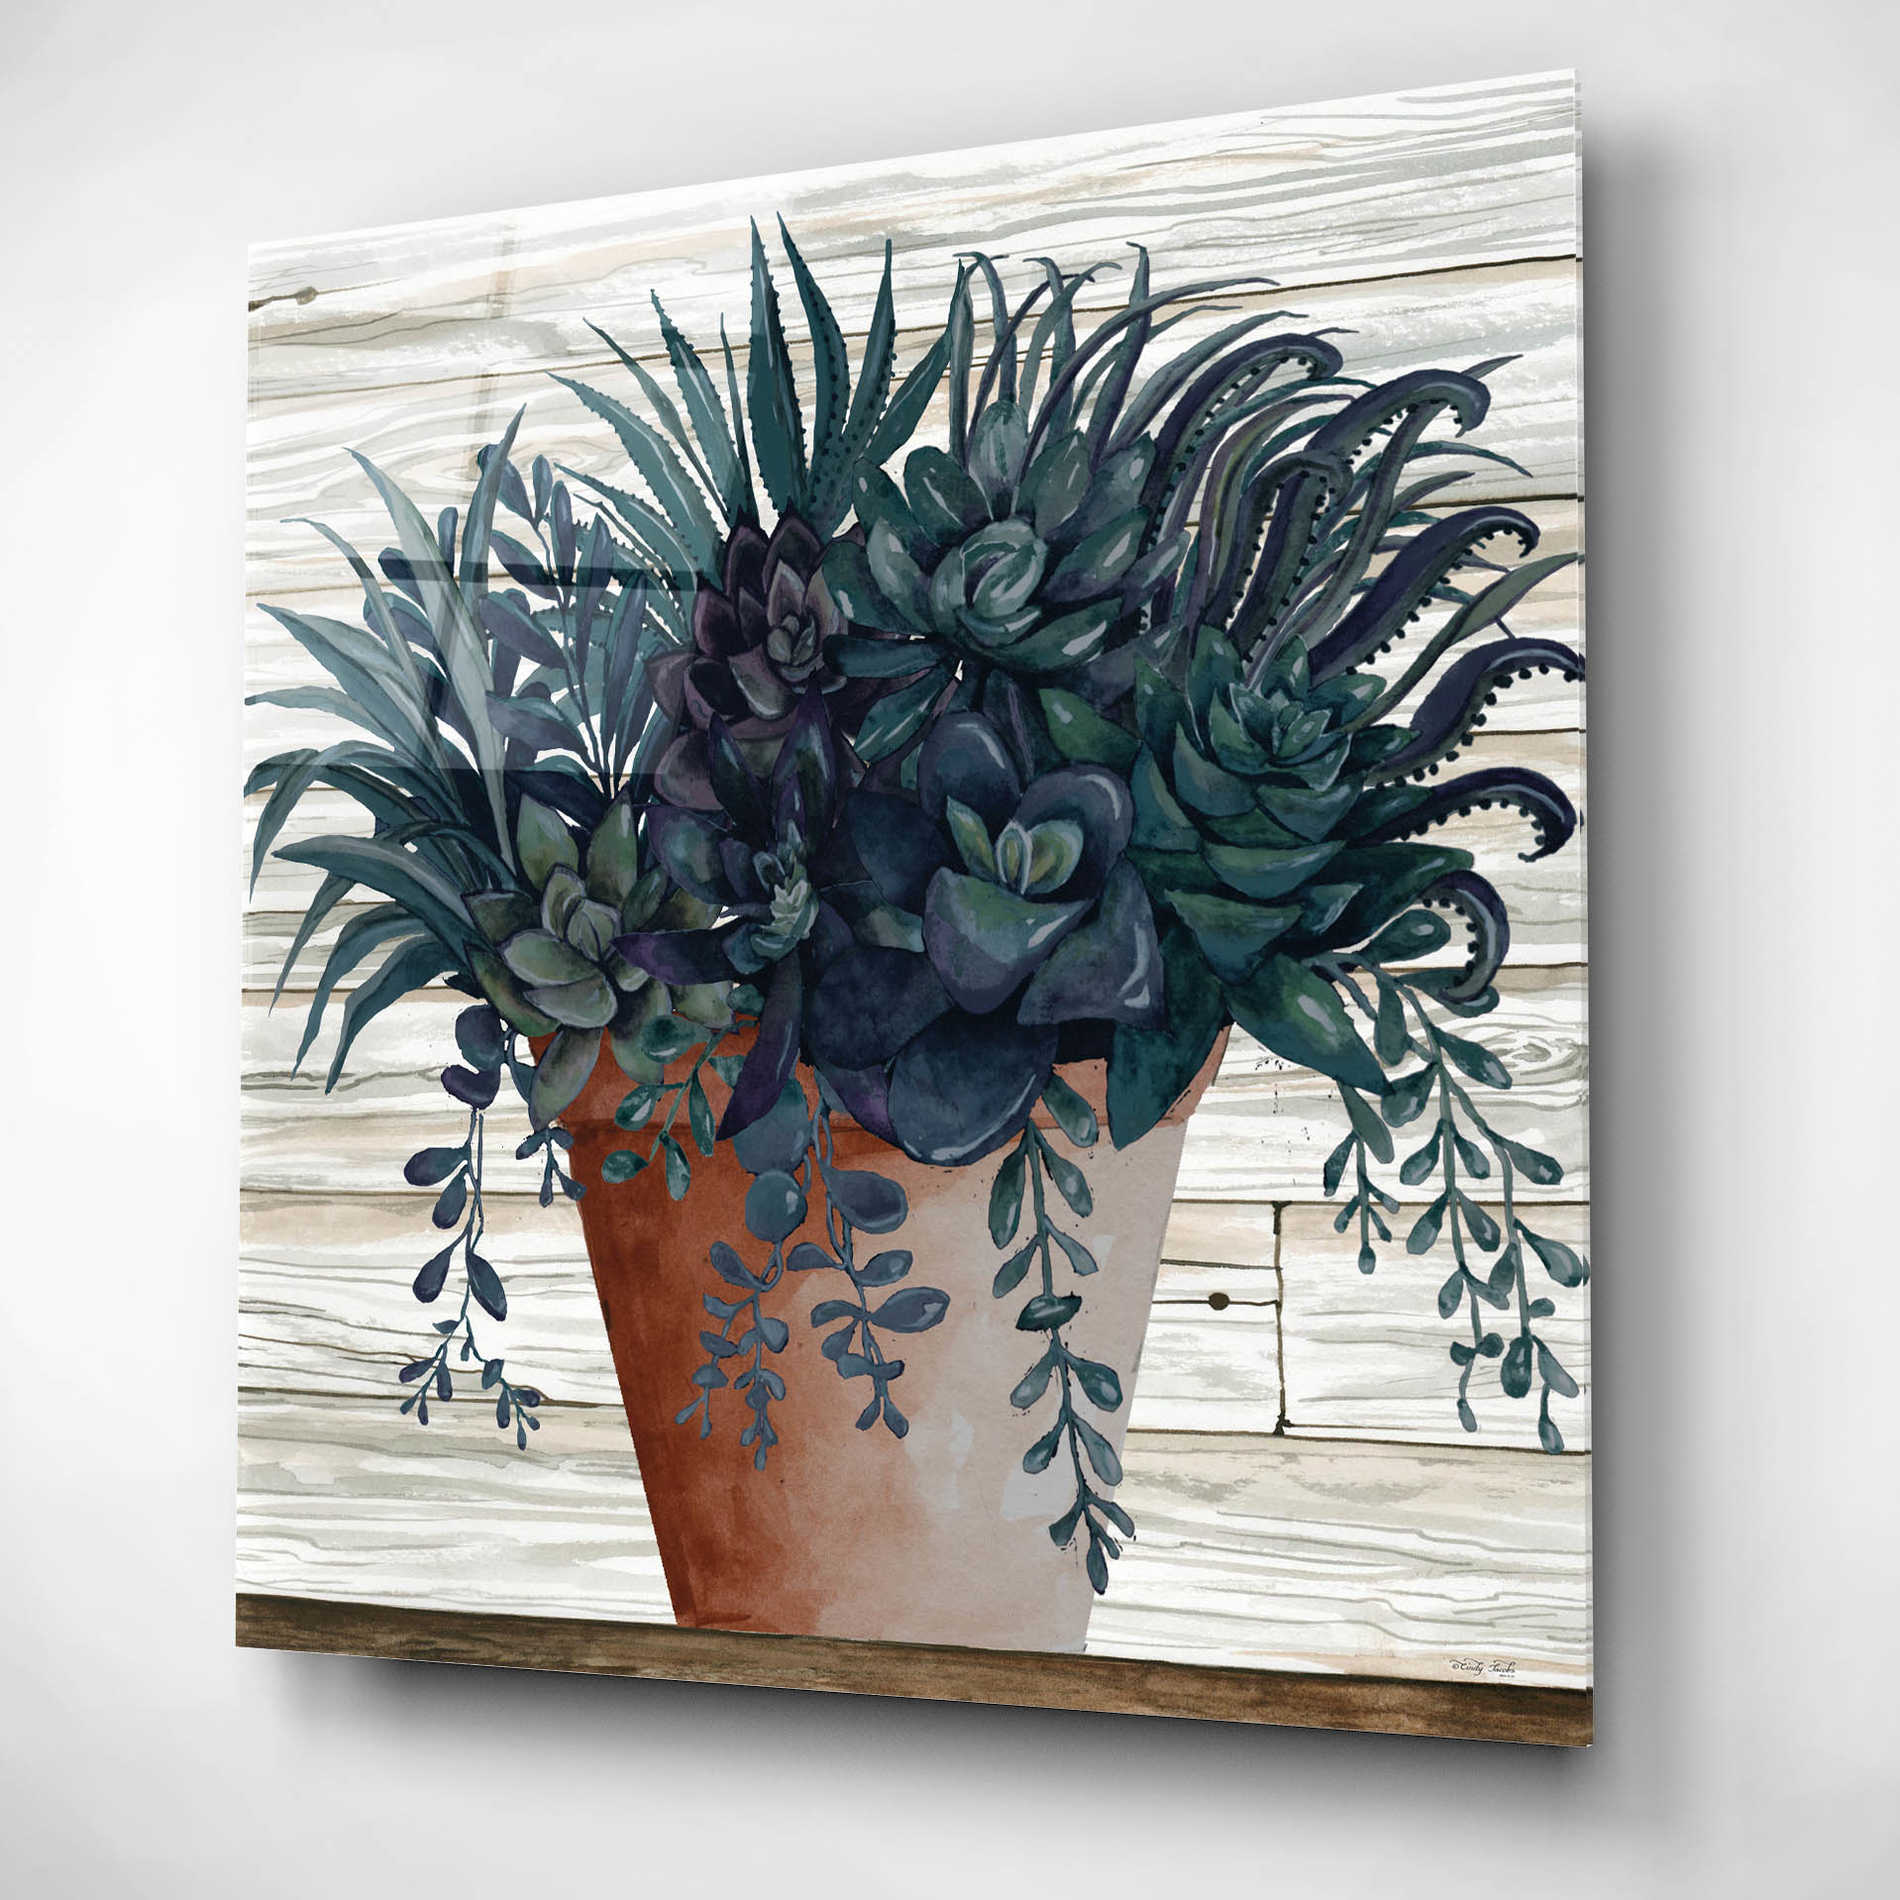 Epic Art 'Remarkable Succulents I' by Cindy Jacobs, Acrylic Glass Wall Art,12x12